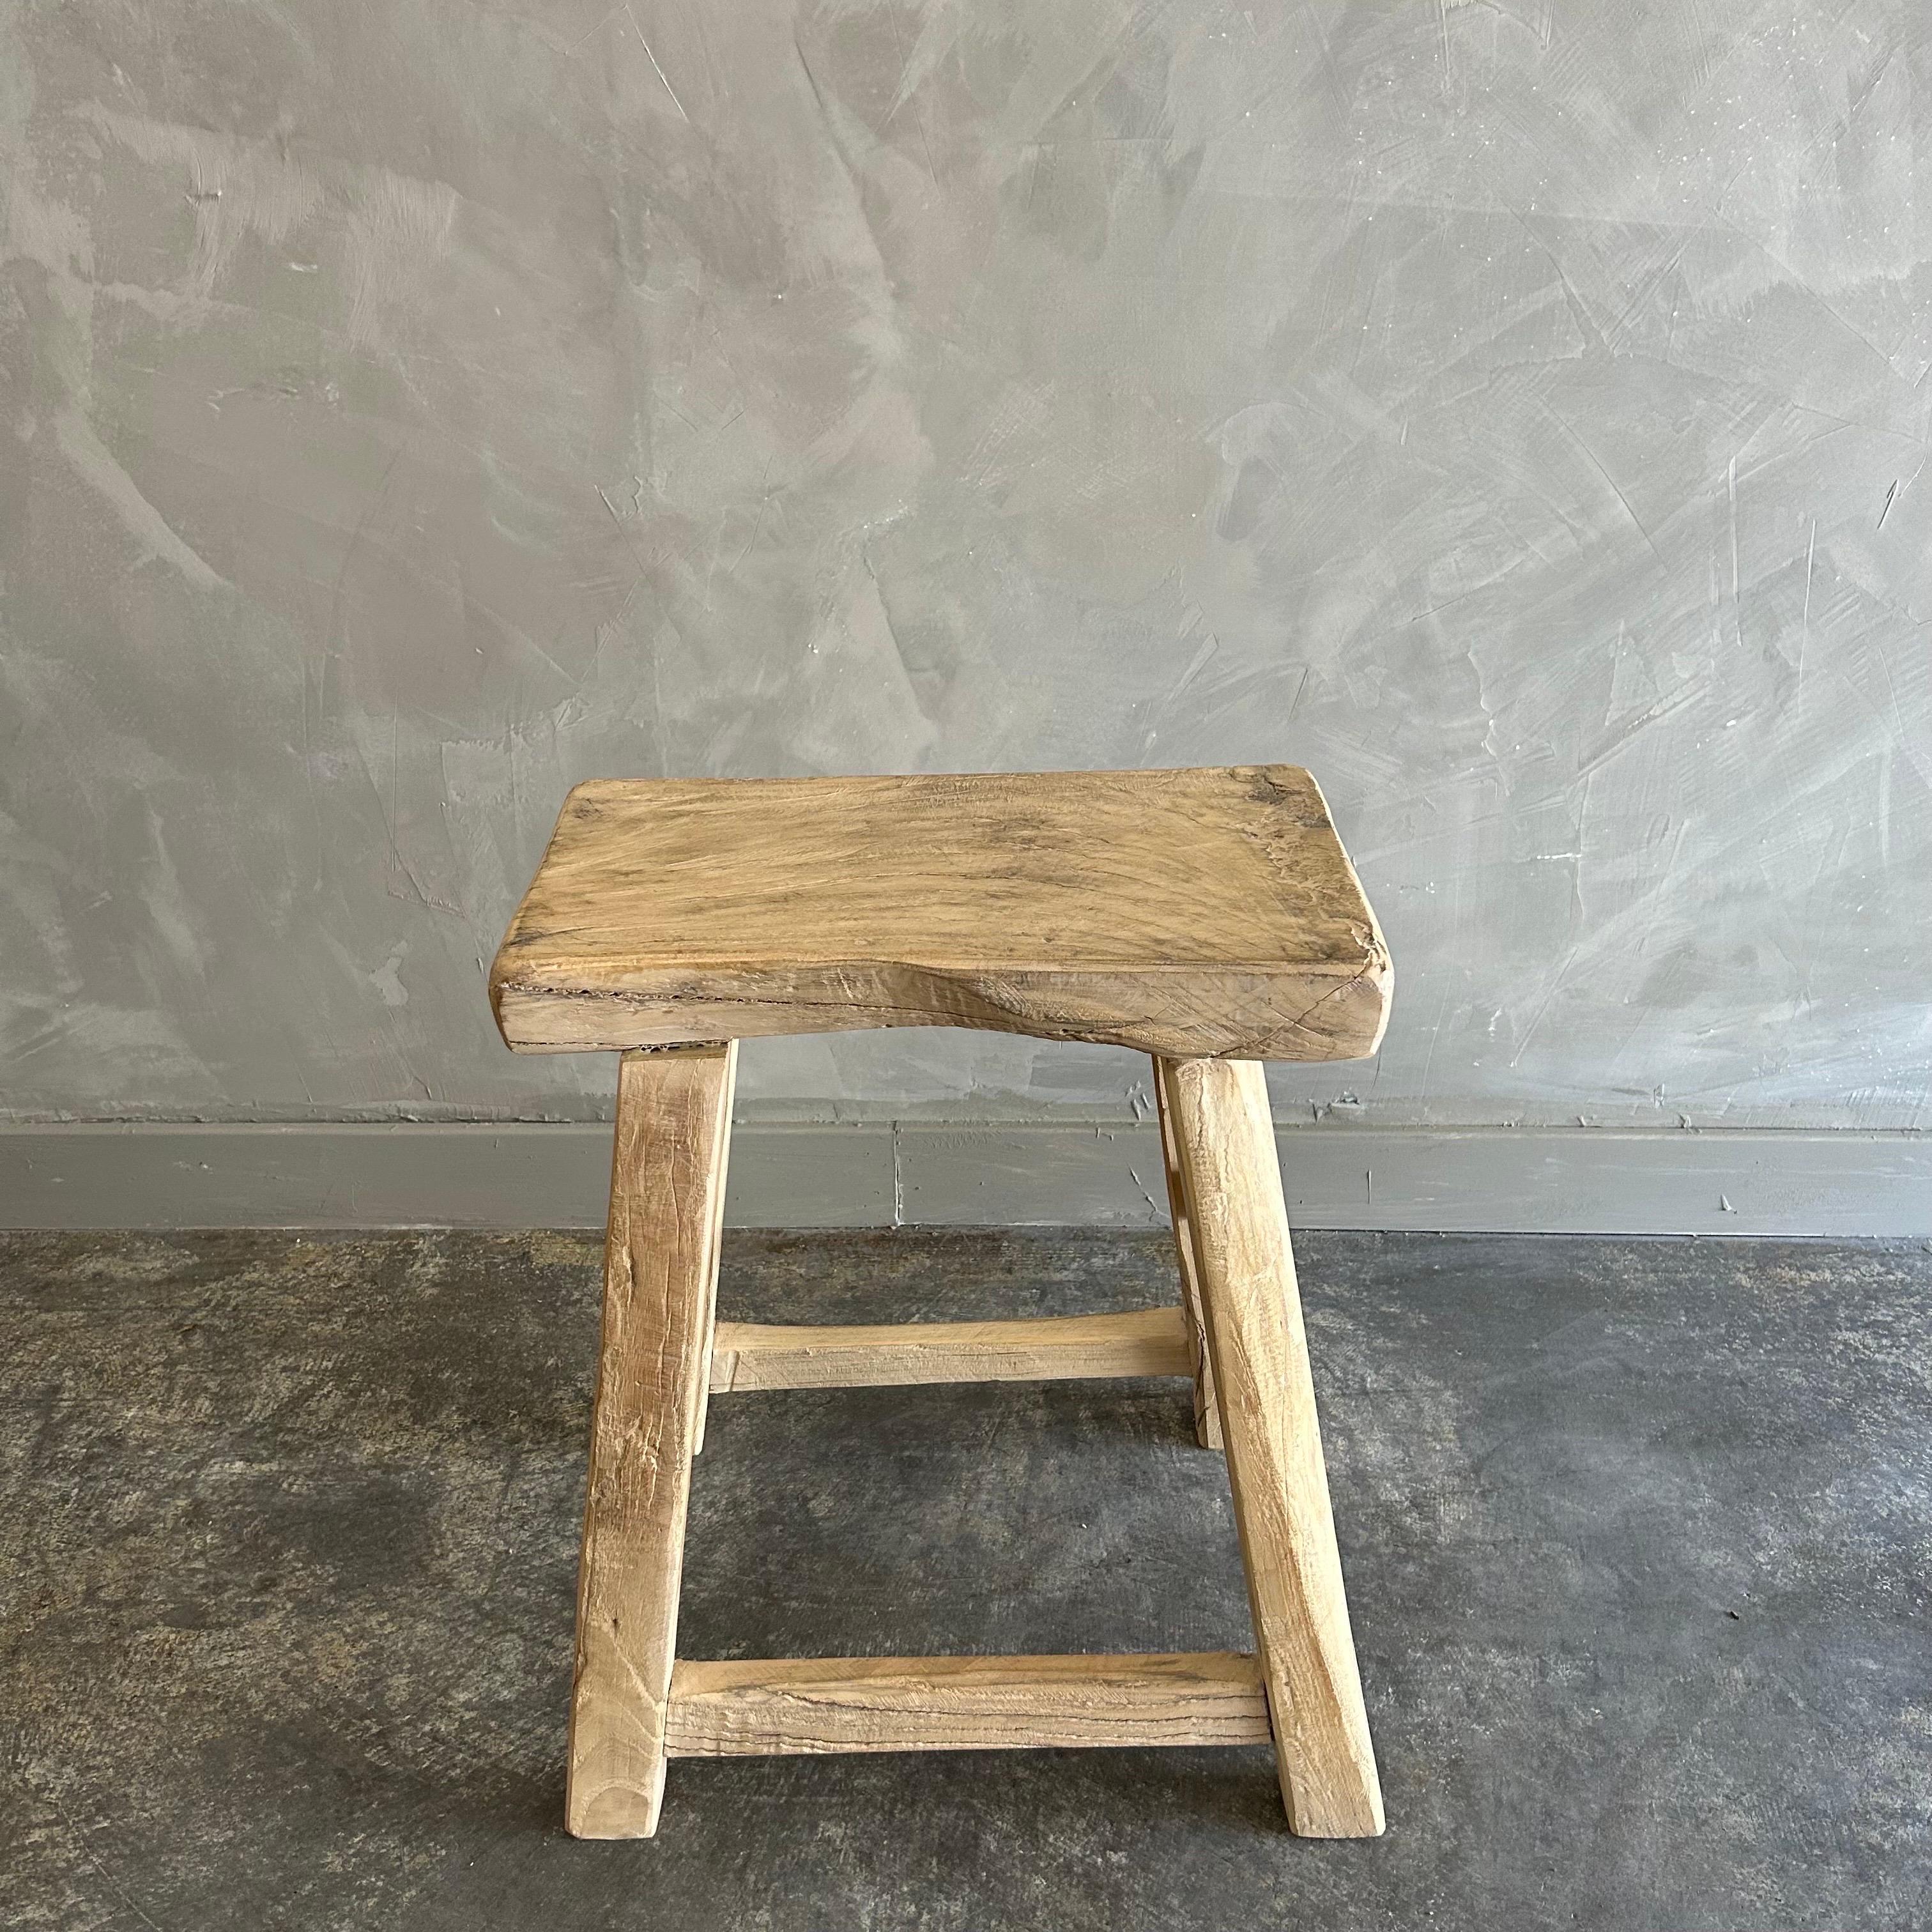 Welcome to bloomhomeinc we stock over 2000 items, please scroll down and click view sellers other items to see more!
Size: 16”w x 13”d x 20”h
SD:9”
Vintage Antique Elm Wood stool made from vintage reclaimed elm wood. Beautiful antique patina, with